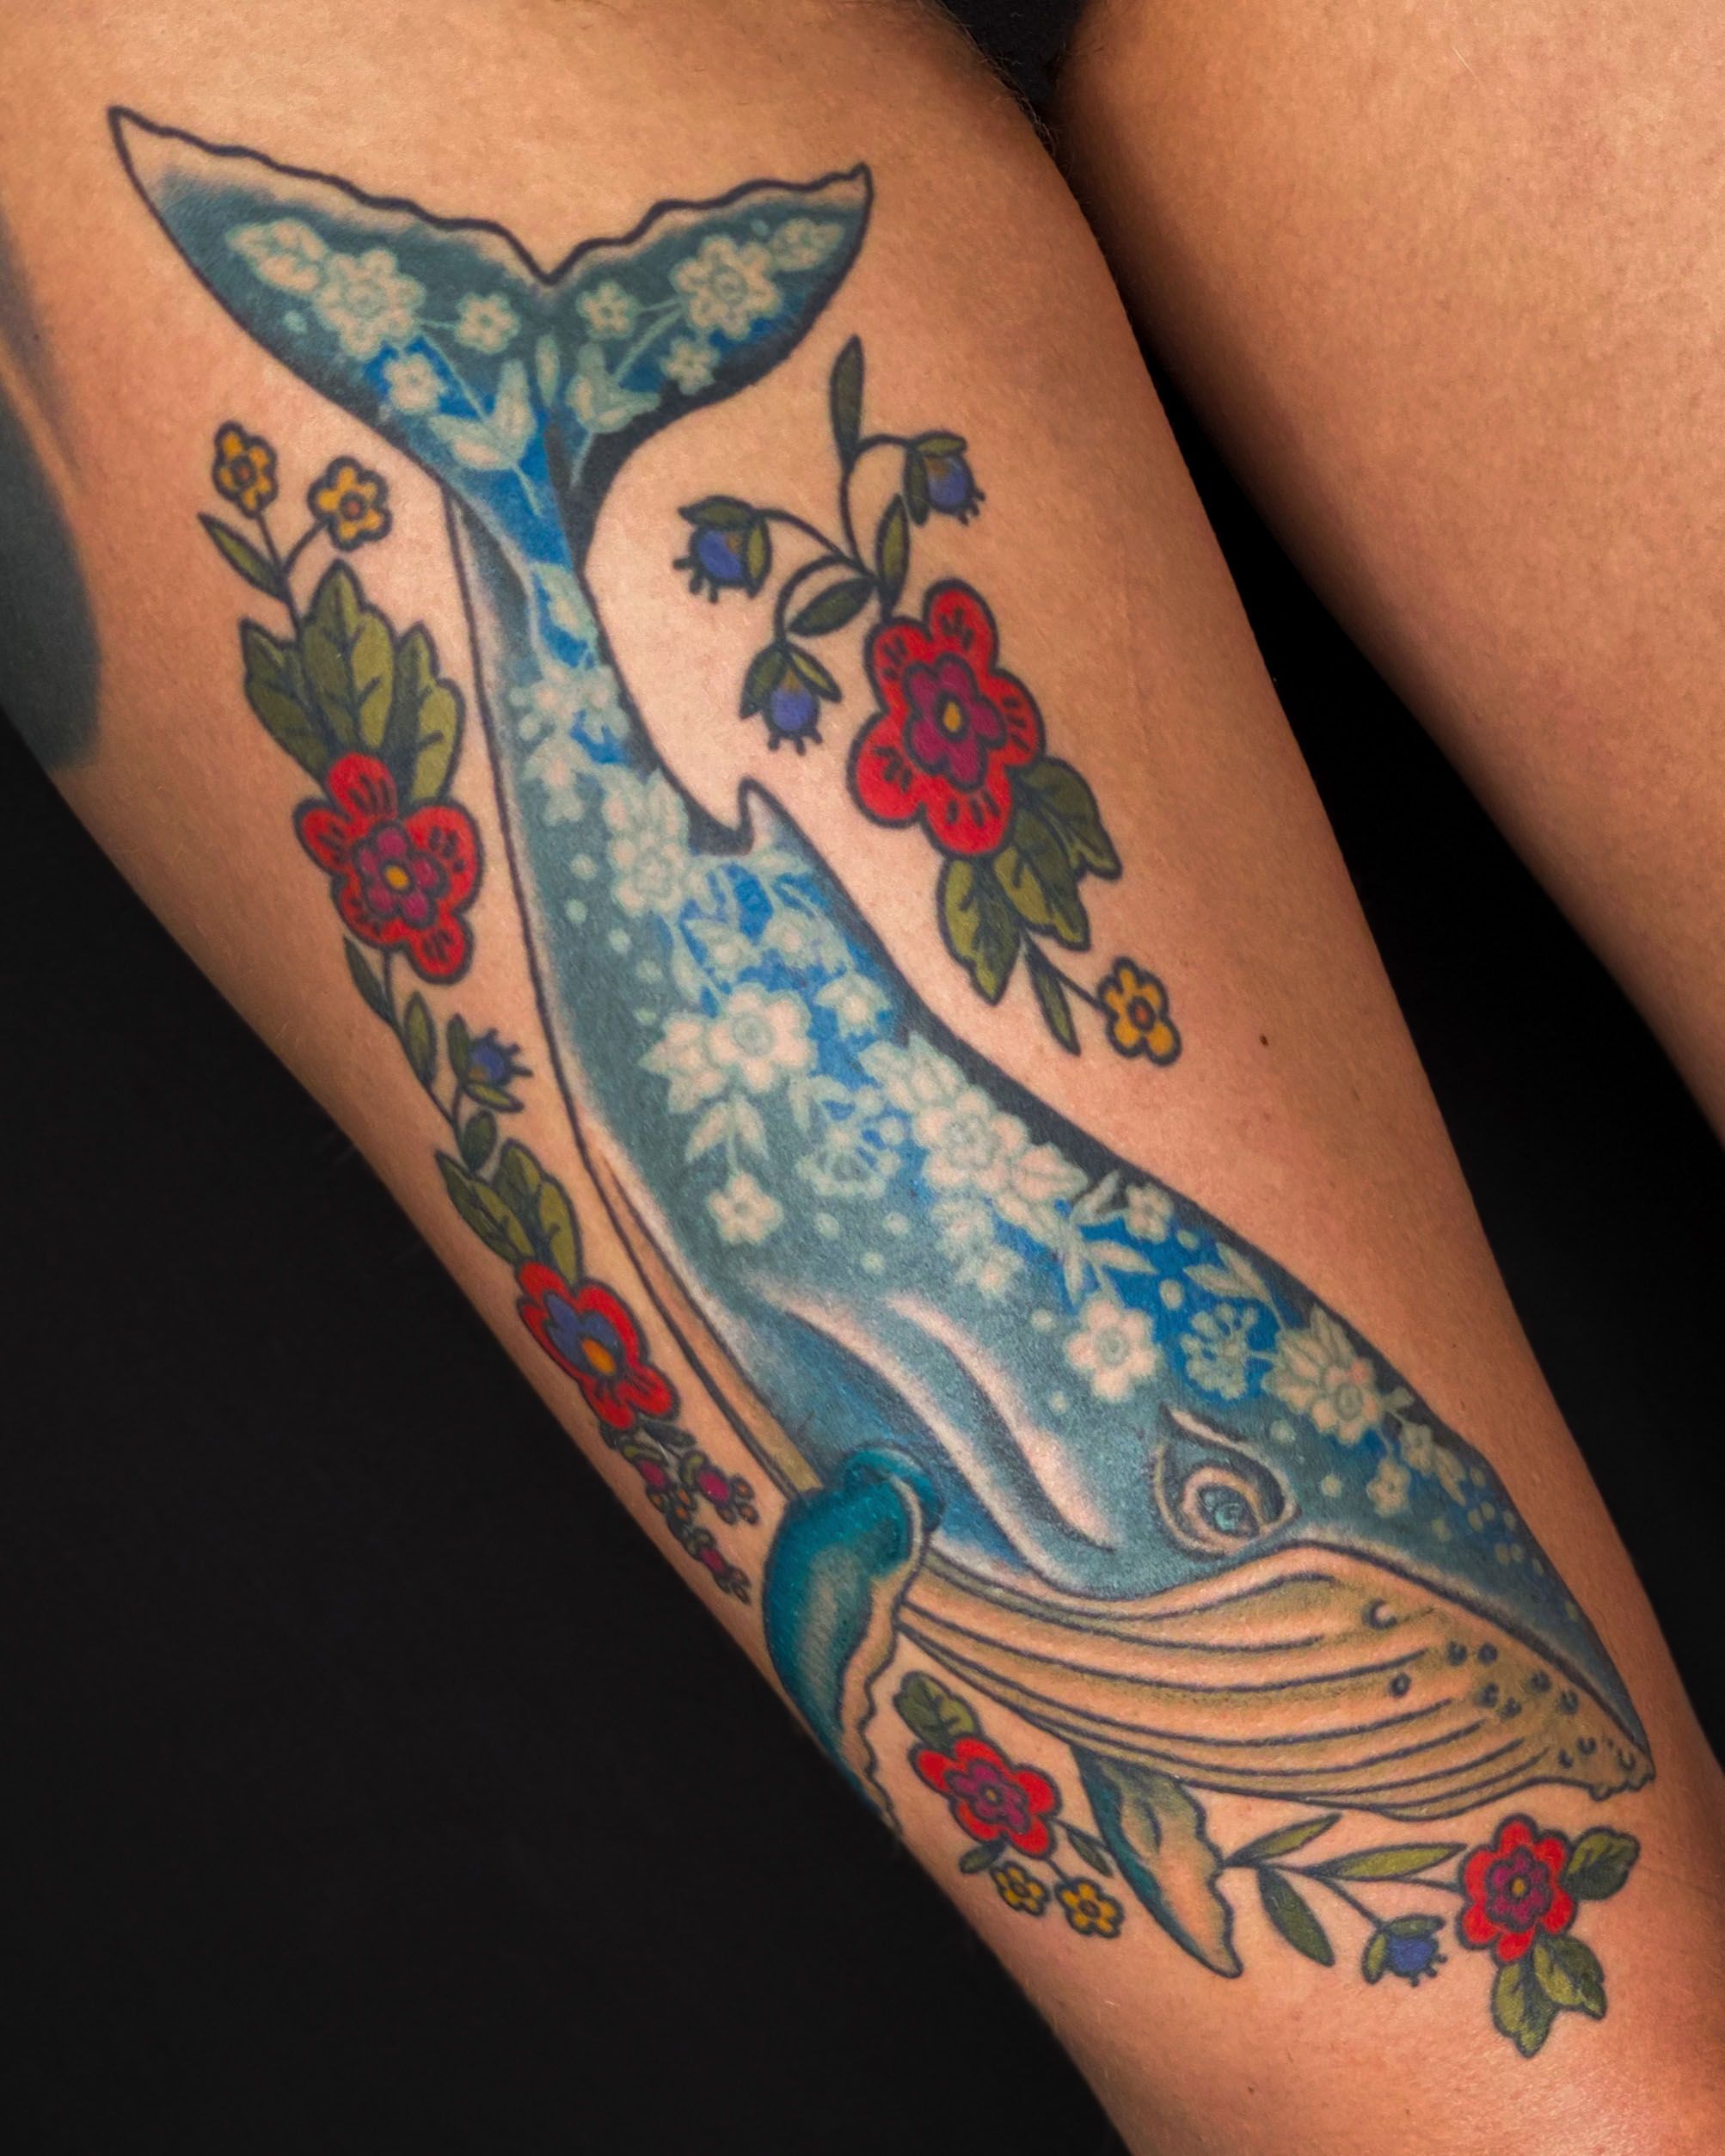 Siamese fighting betta fish thigh tattoo done just 2 days ago Took 11  hours over 2 sessions 74 Artist ginodt Subterra Tattoo Studio  Stockholm Sweden  rtattoos